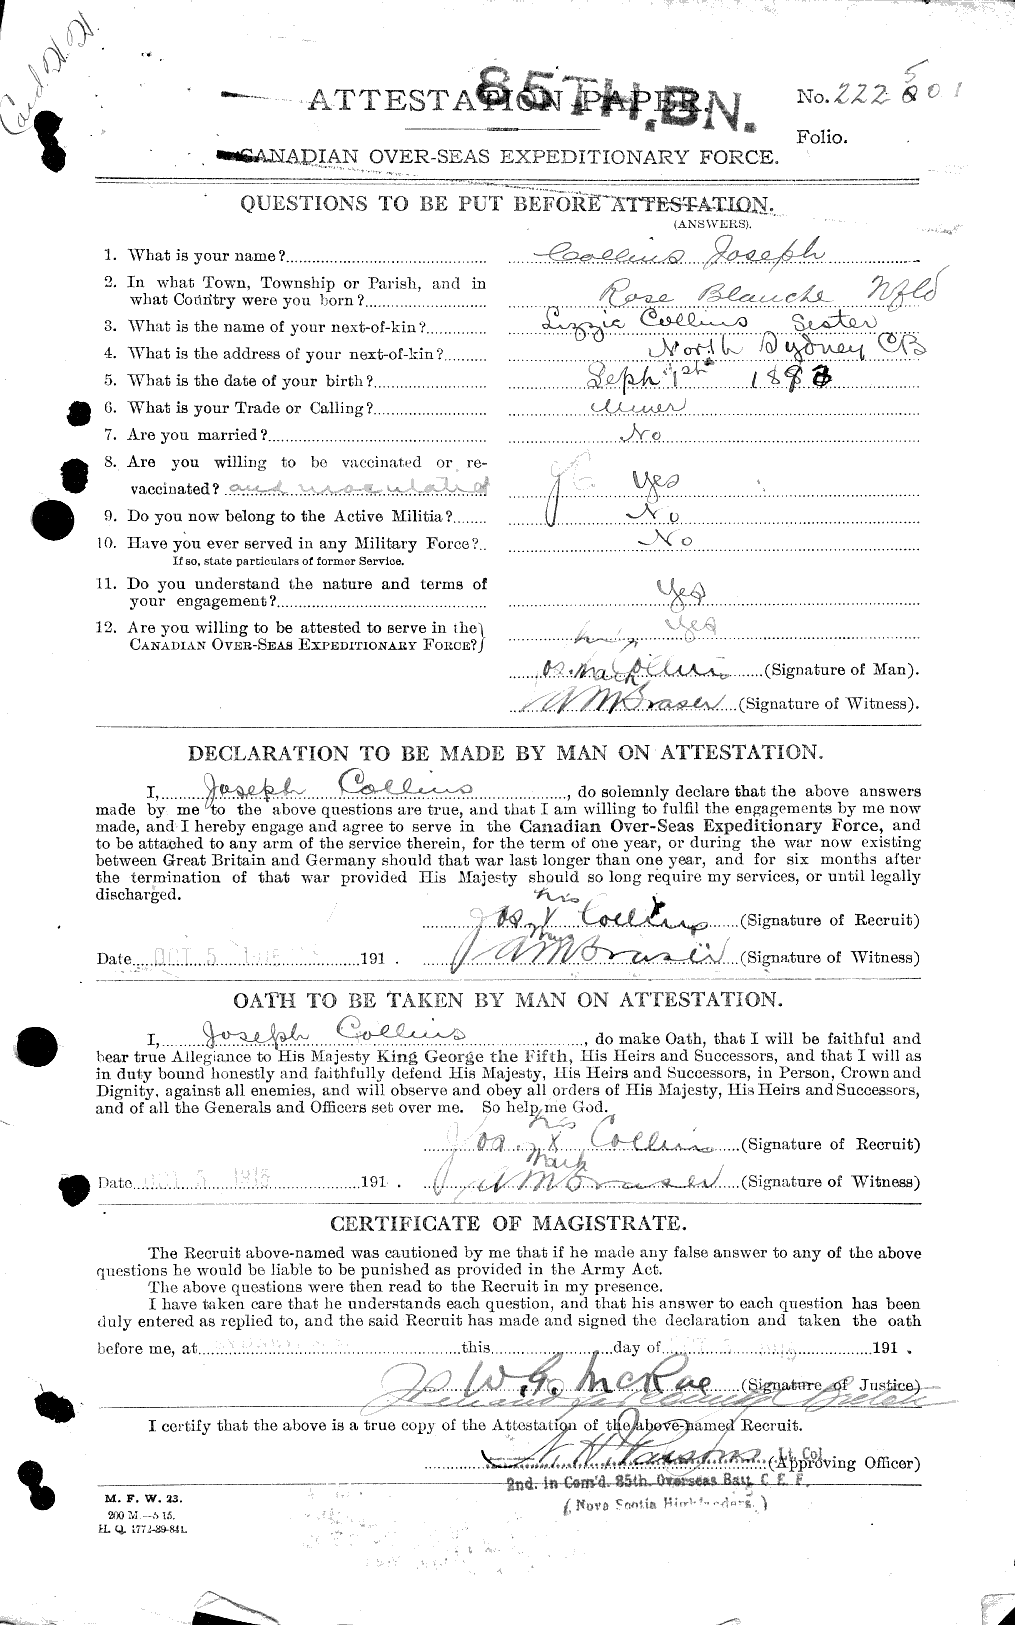 Personnel Records of the First World War - CEF 034398a